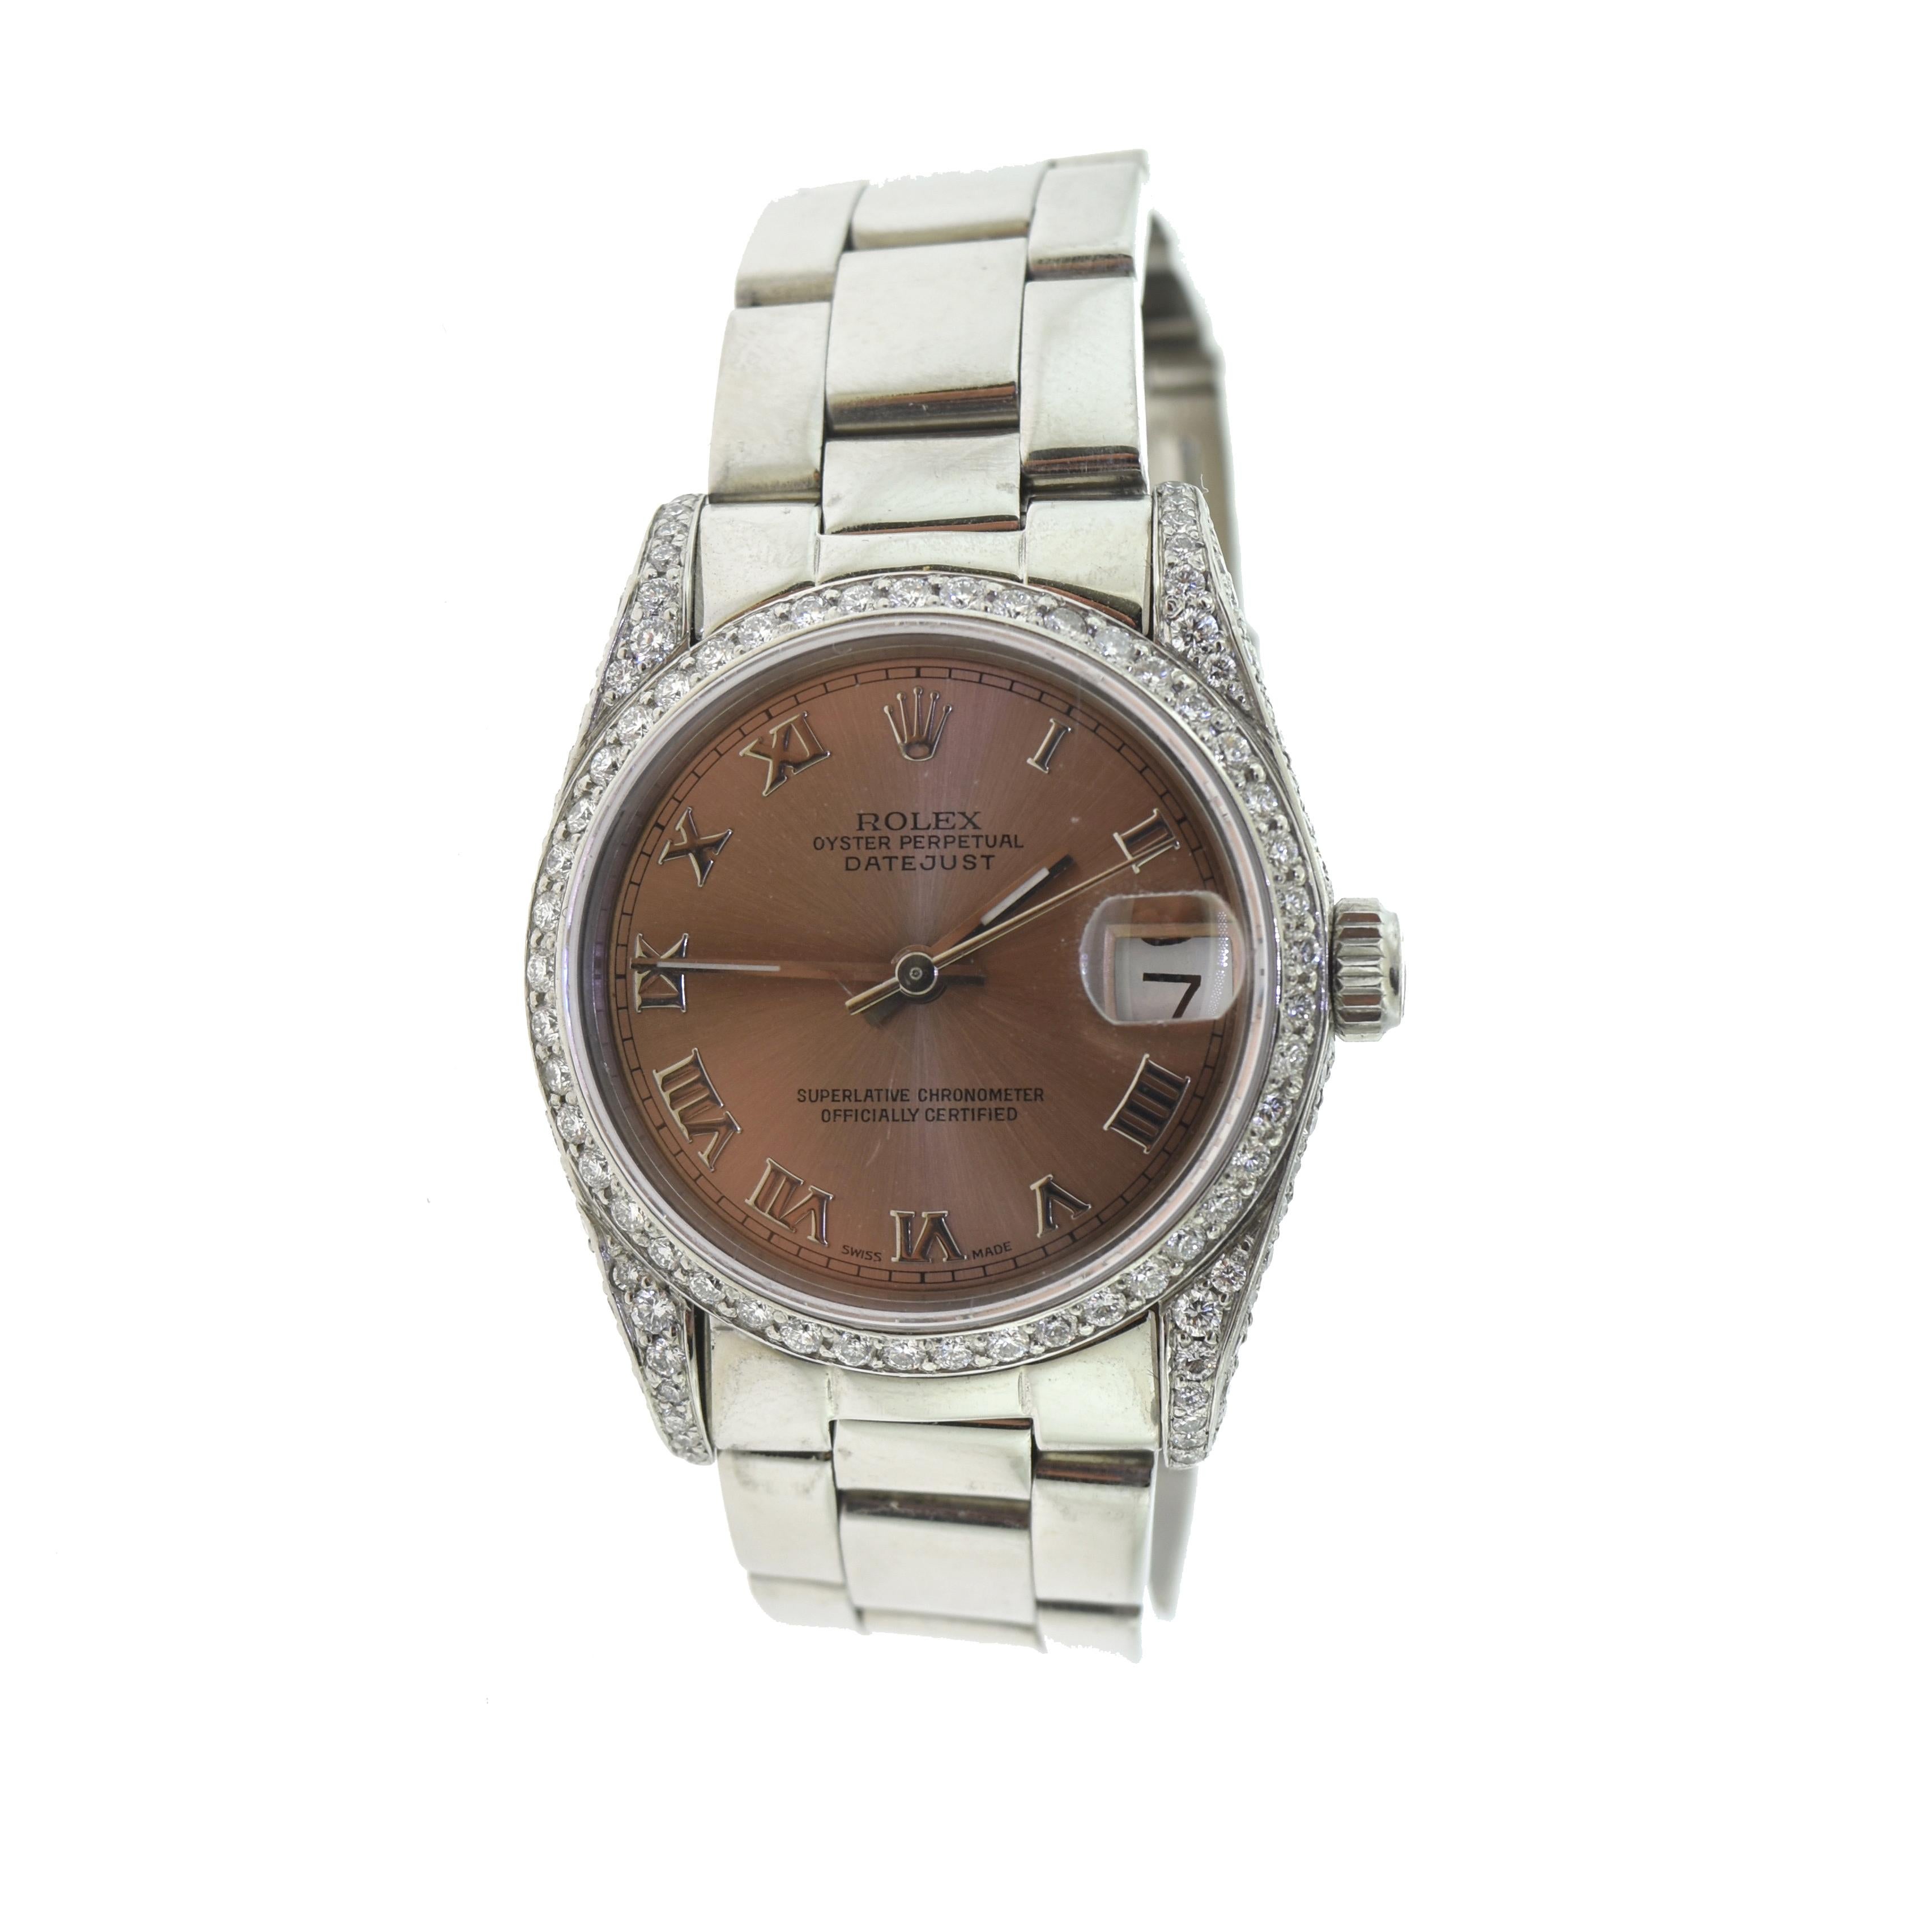 Brand: Rolex

Model Name: Datejust

Model Number: 178274

Movement: Automatic

Case Size: 31 mm

Case Material: Stainless Steel

Bezel: Diamond

Dial Color: Pink Metallic

Hour Markers: Roman Numerals

Bracelet: ​​​​​​​Stainless Steel

Features: